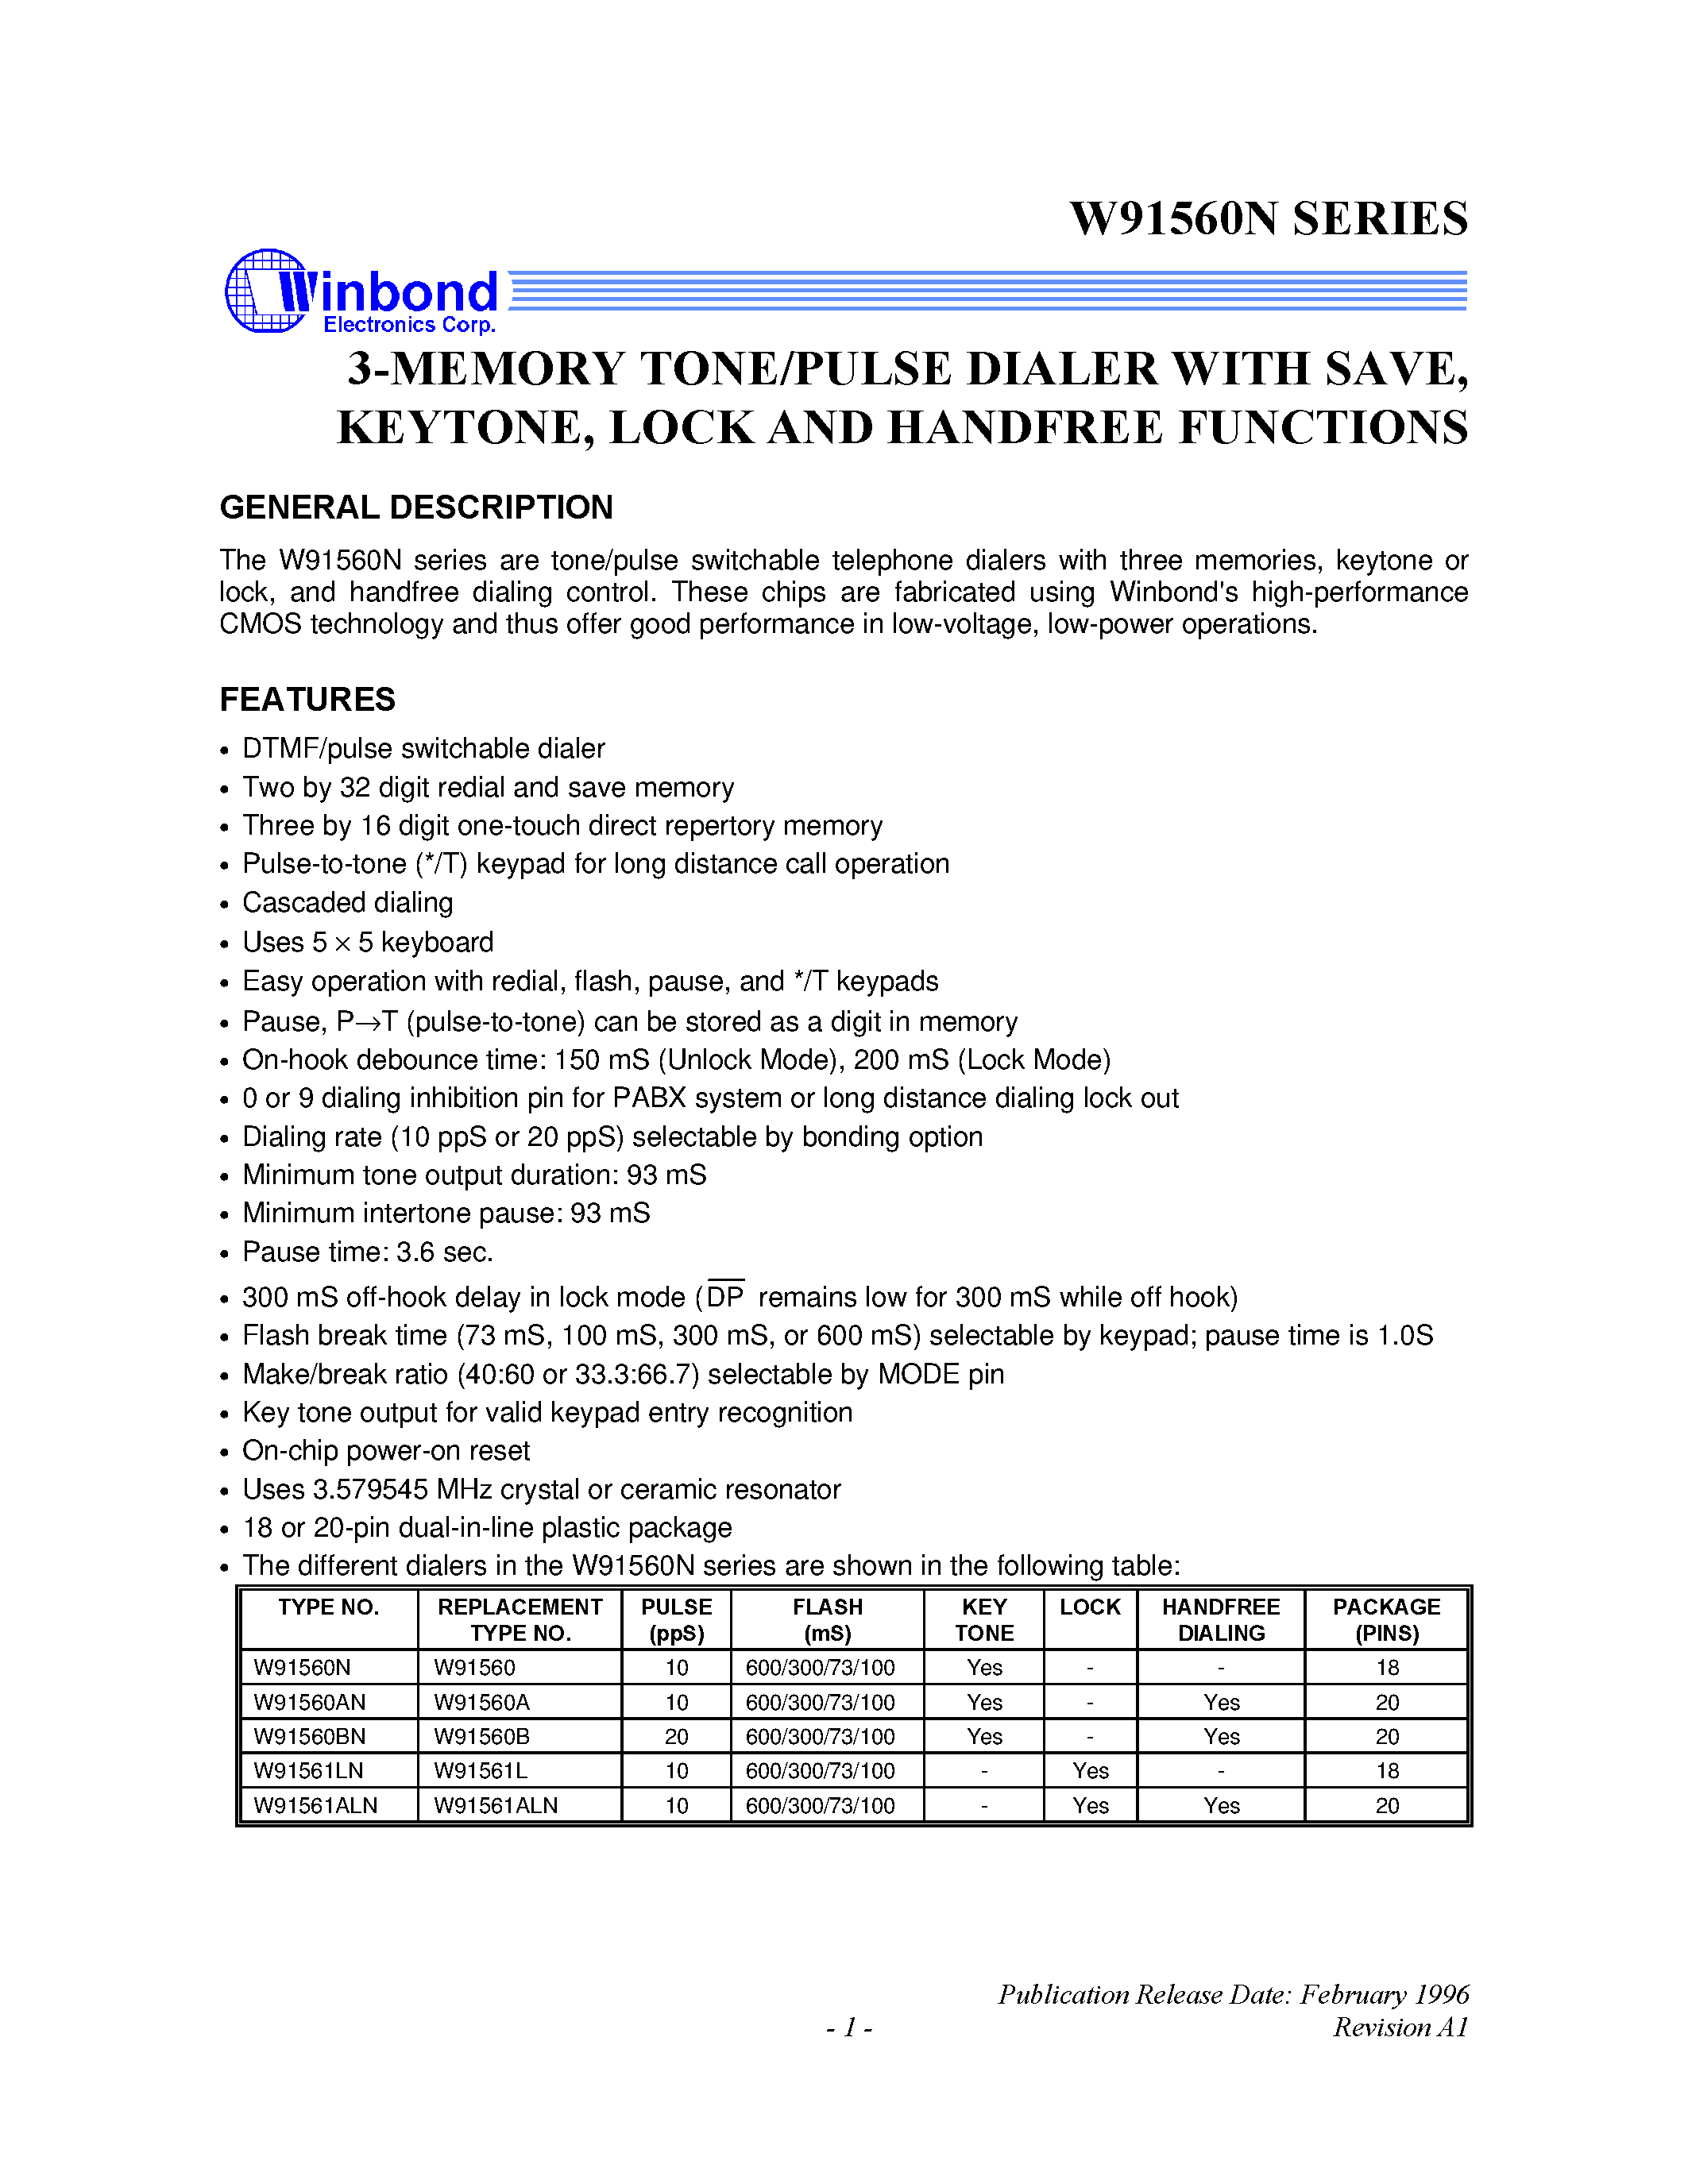 Datasheet W91560BN - 3-MEMORY TONE/PULSE DIALER WITH SAVE/ KEYTONE/ LOCK AND HANDFREE FUNCTIONS page 1